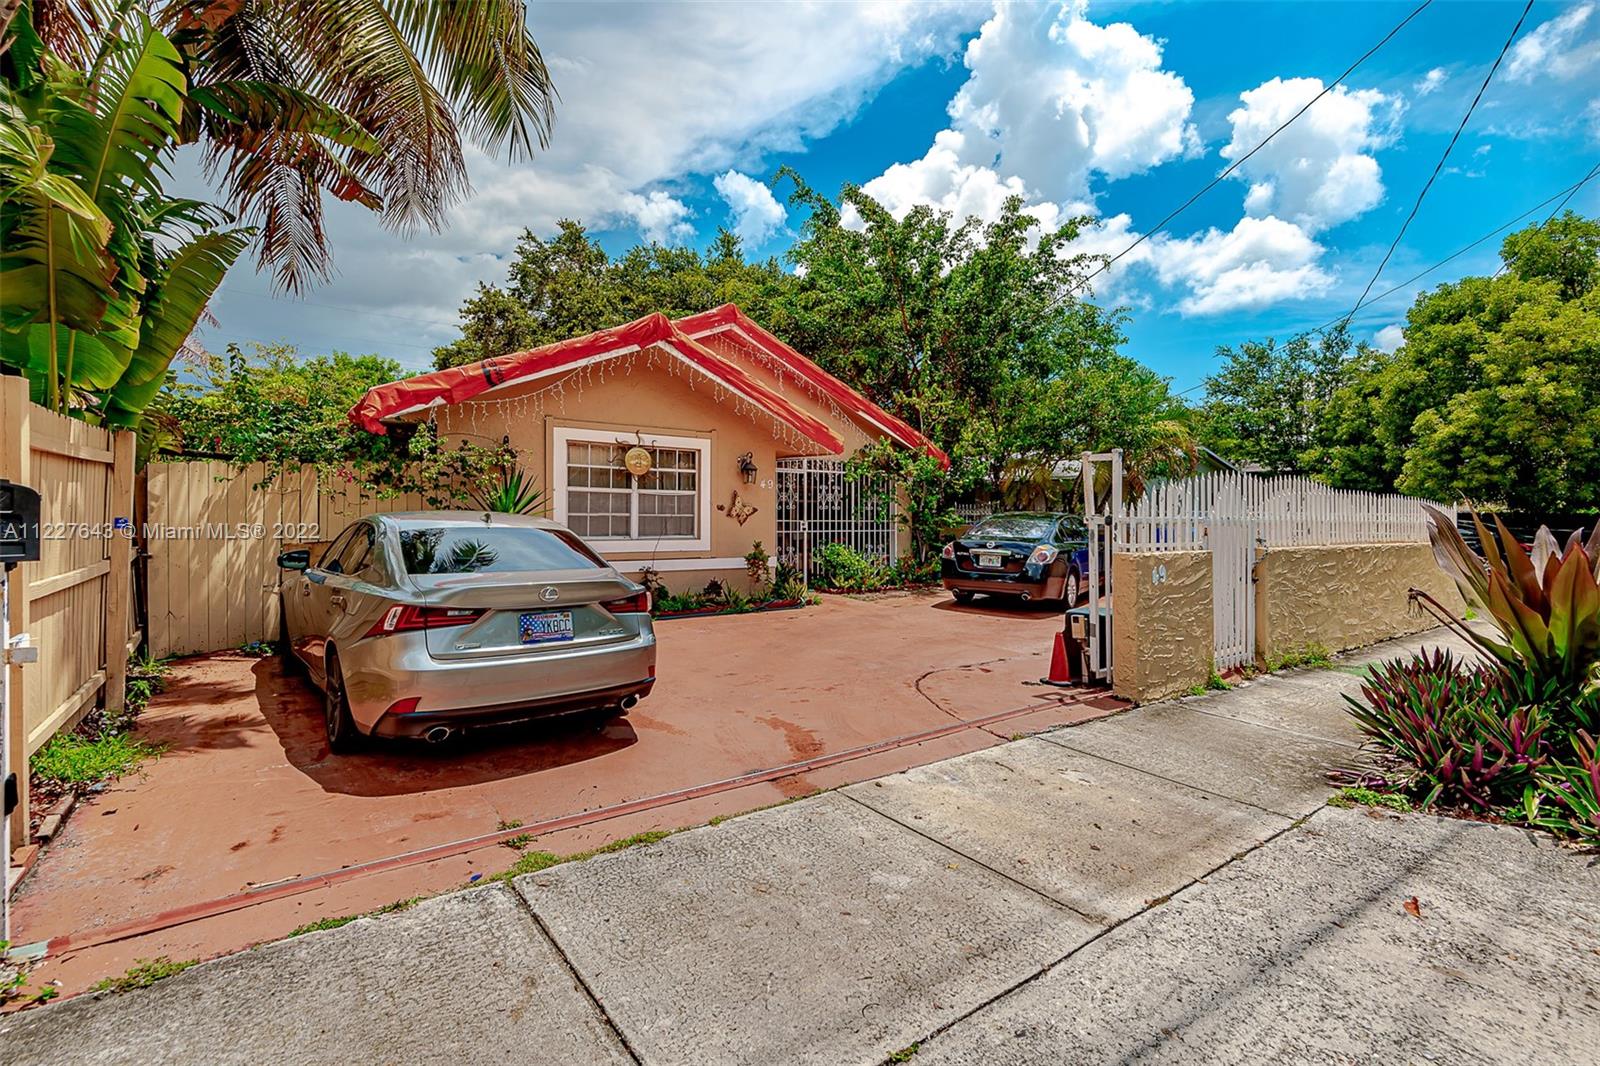 49 Nw 35th St St, Miami, Broward County, Florida - 3 Bedrooms  
2 Bathrooms - 